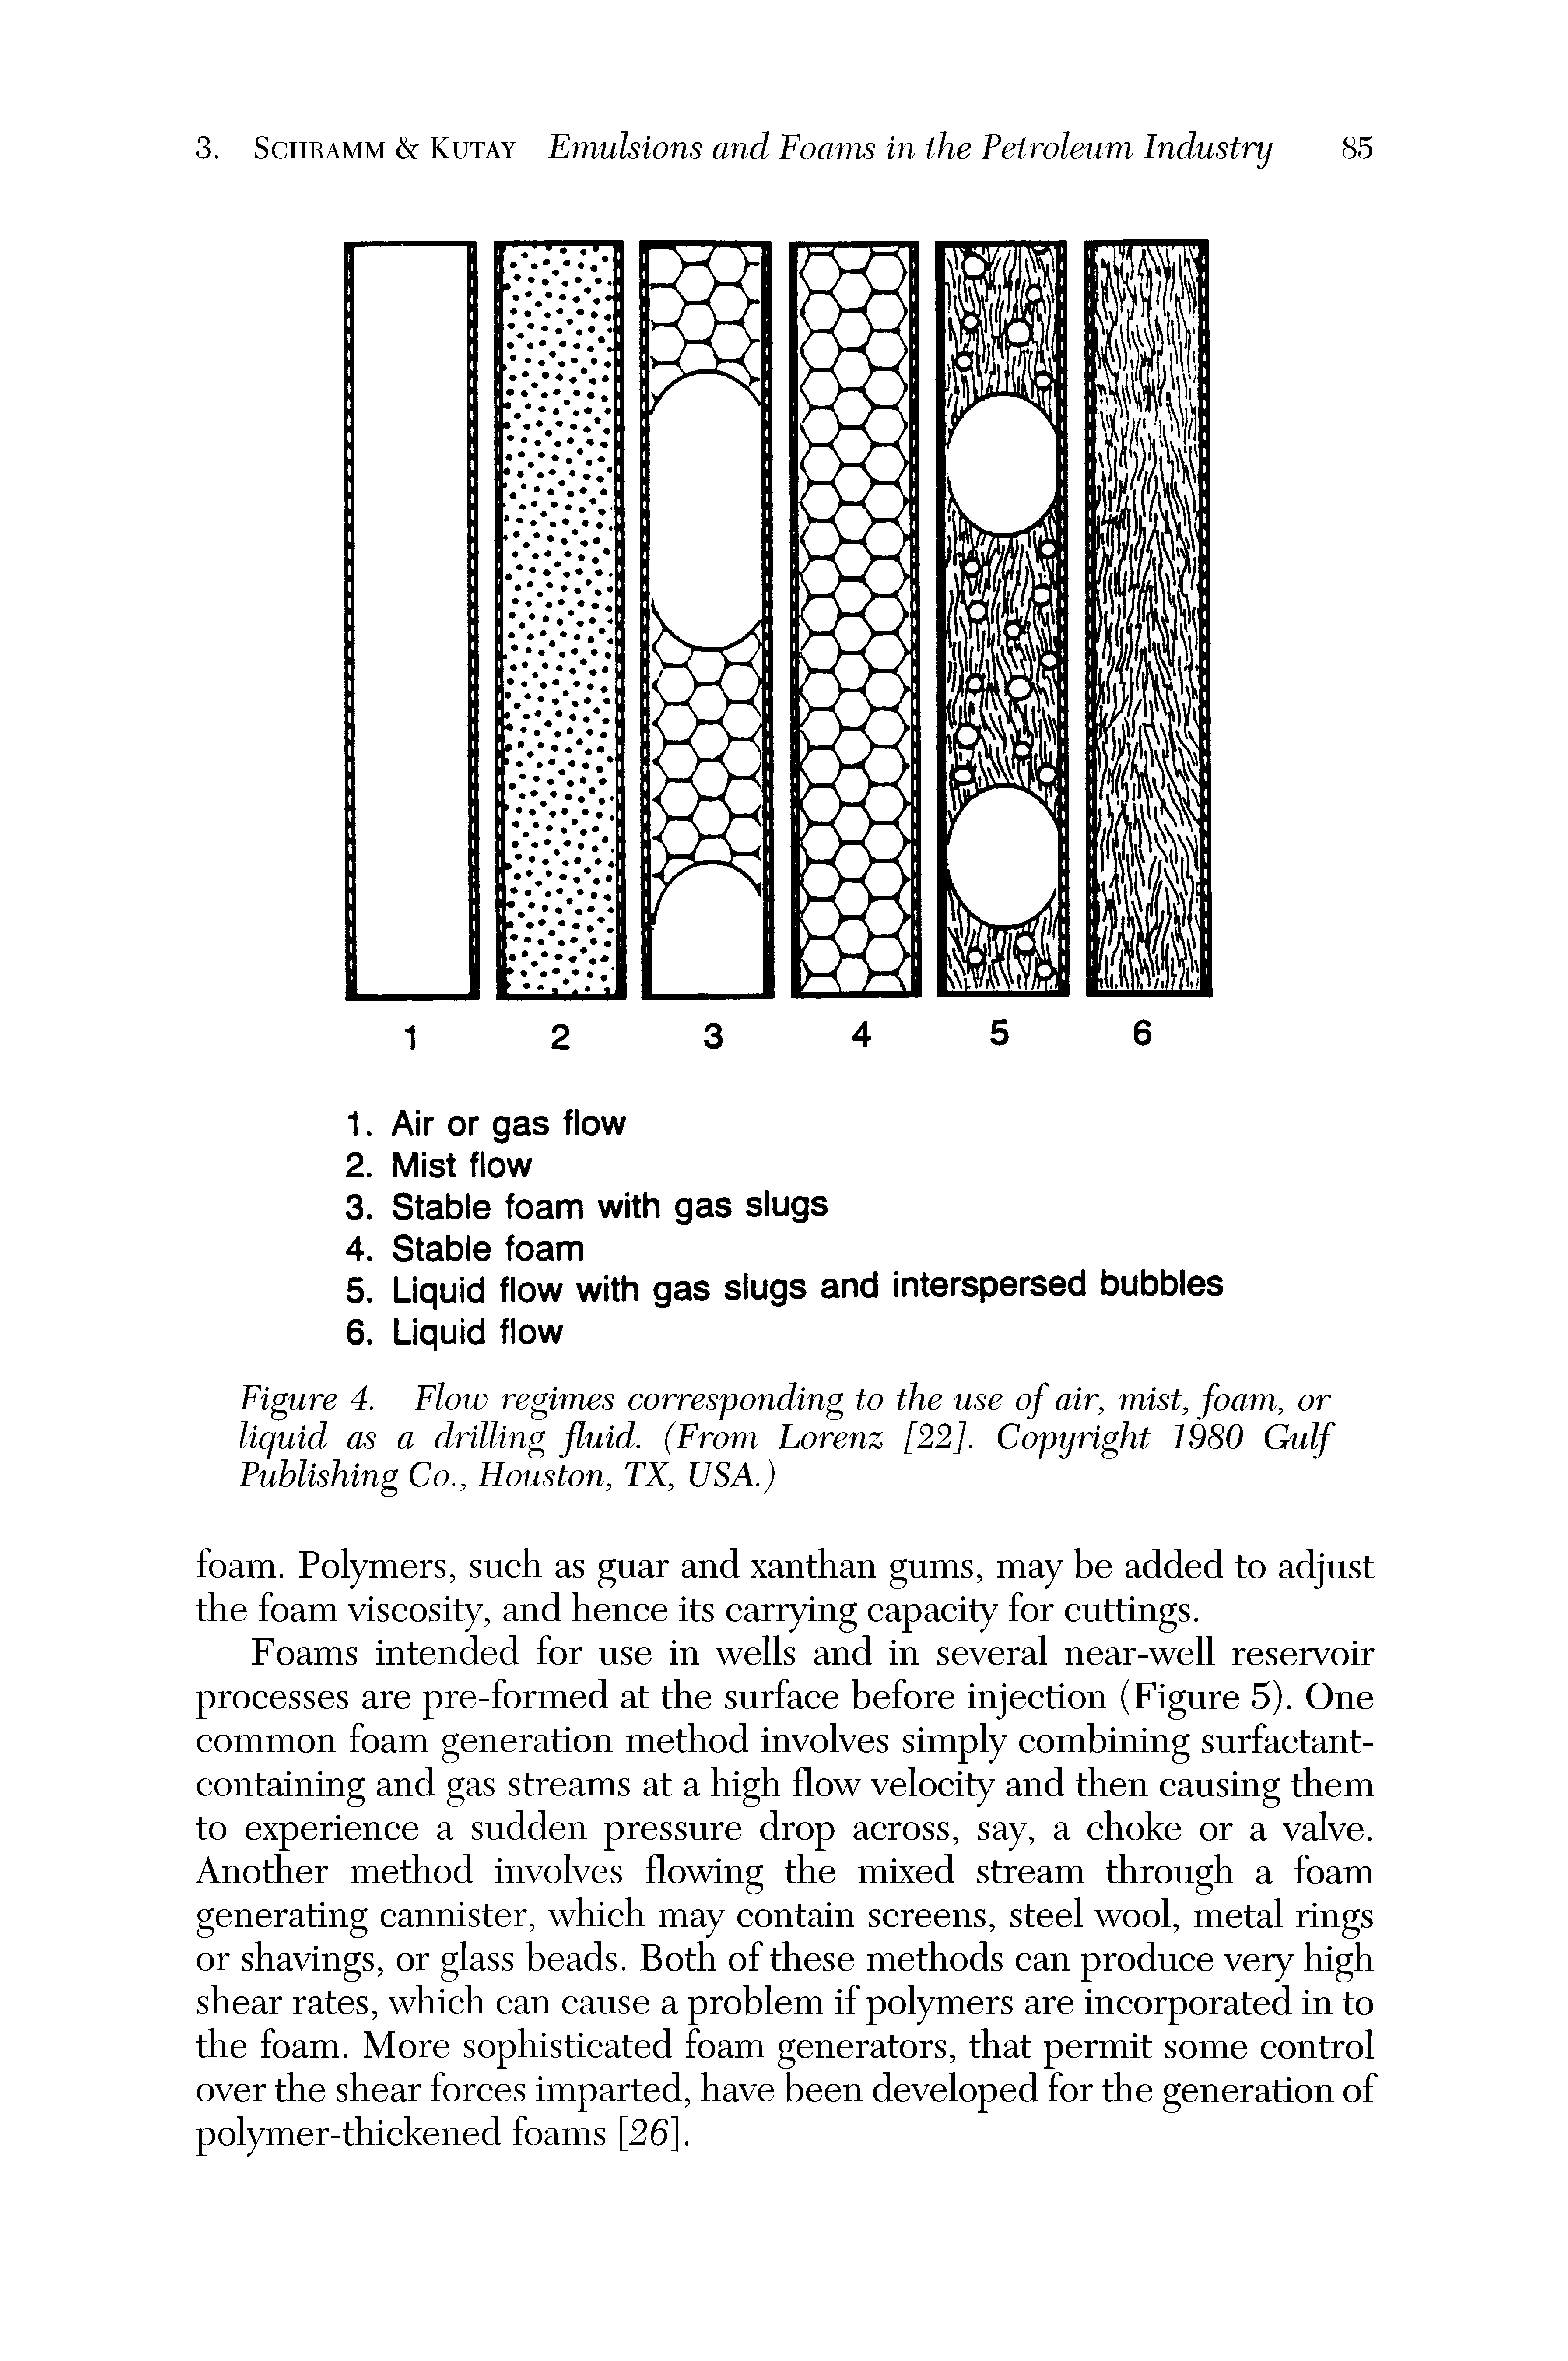 Figure 4. Flow regimes corresponding to the use of air, mist, foam, or liquid as a drilling fluid. (From Lorenz [22]. Copyright 1980 Gulf Publishing Co., Houston, TX, USA.)...